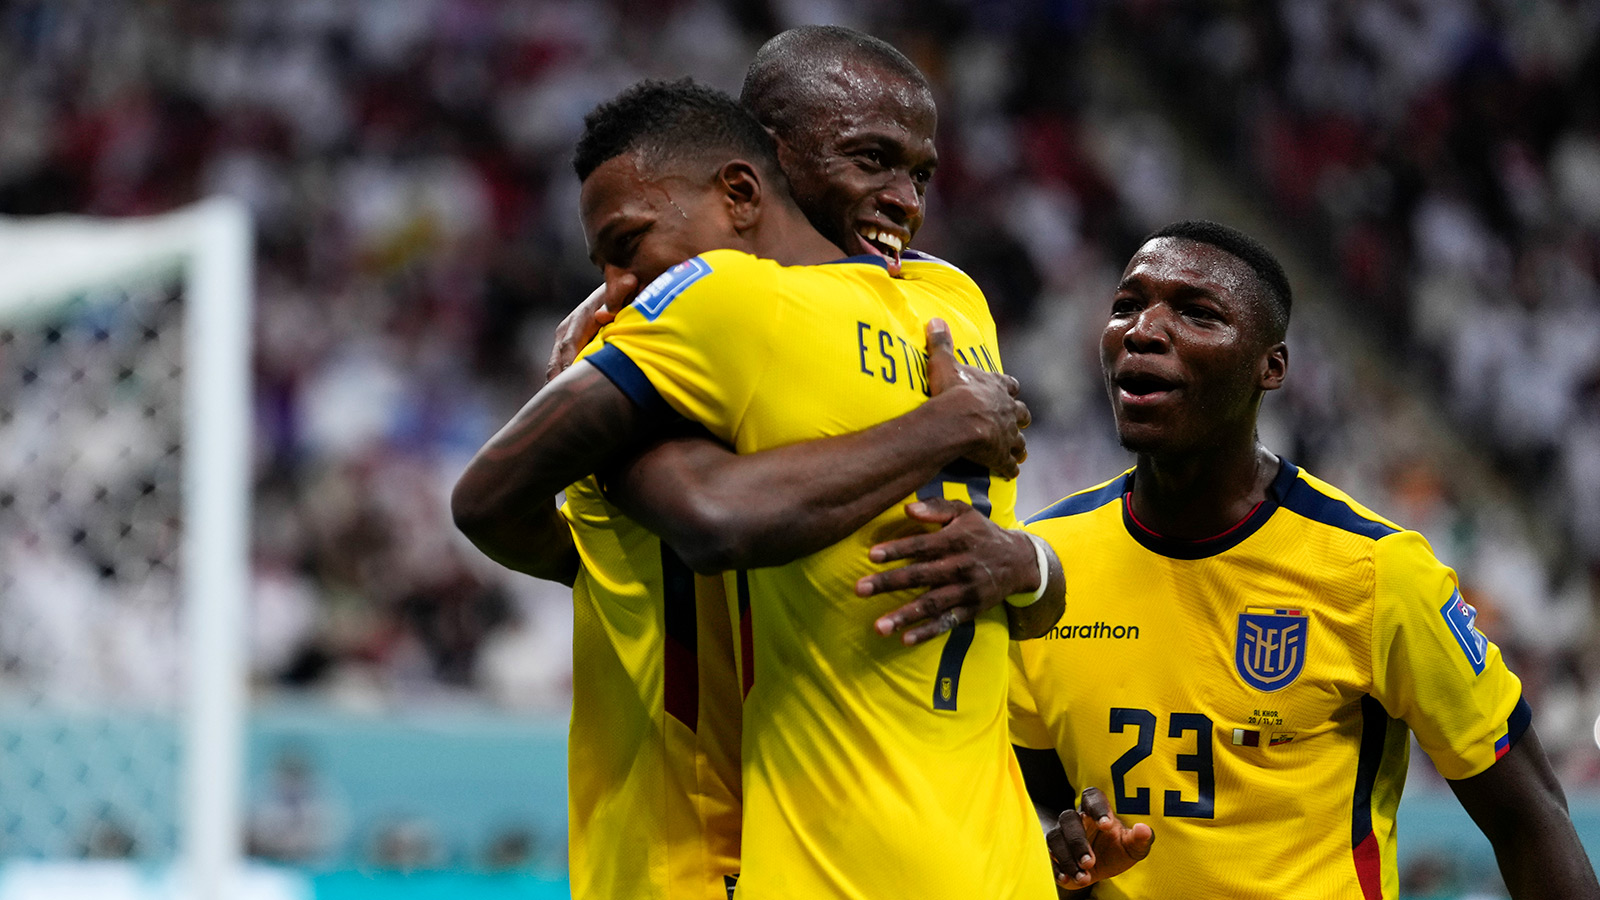 Ecuador's Ener Valencia celebrate with teammates after scoring the first goal from the penalty spot.